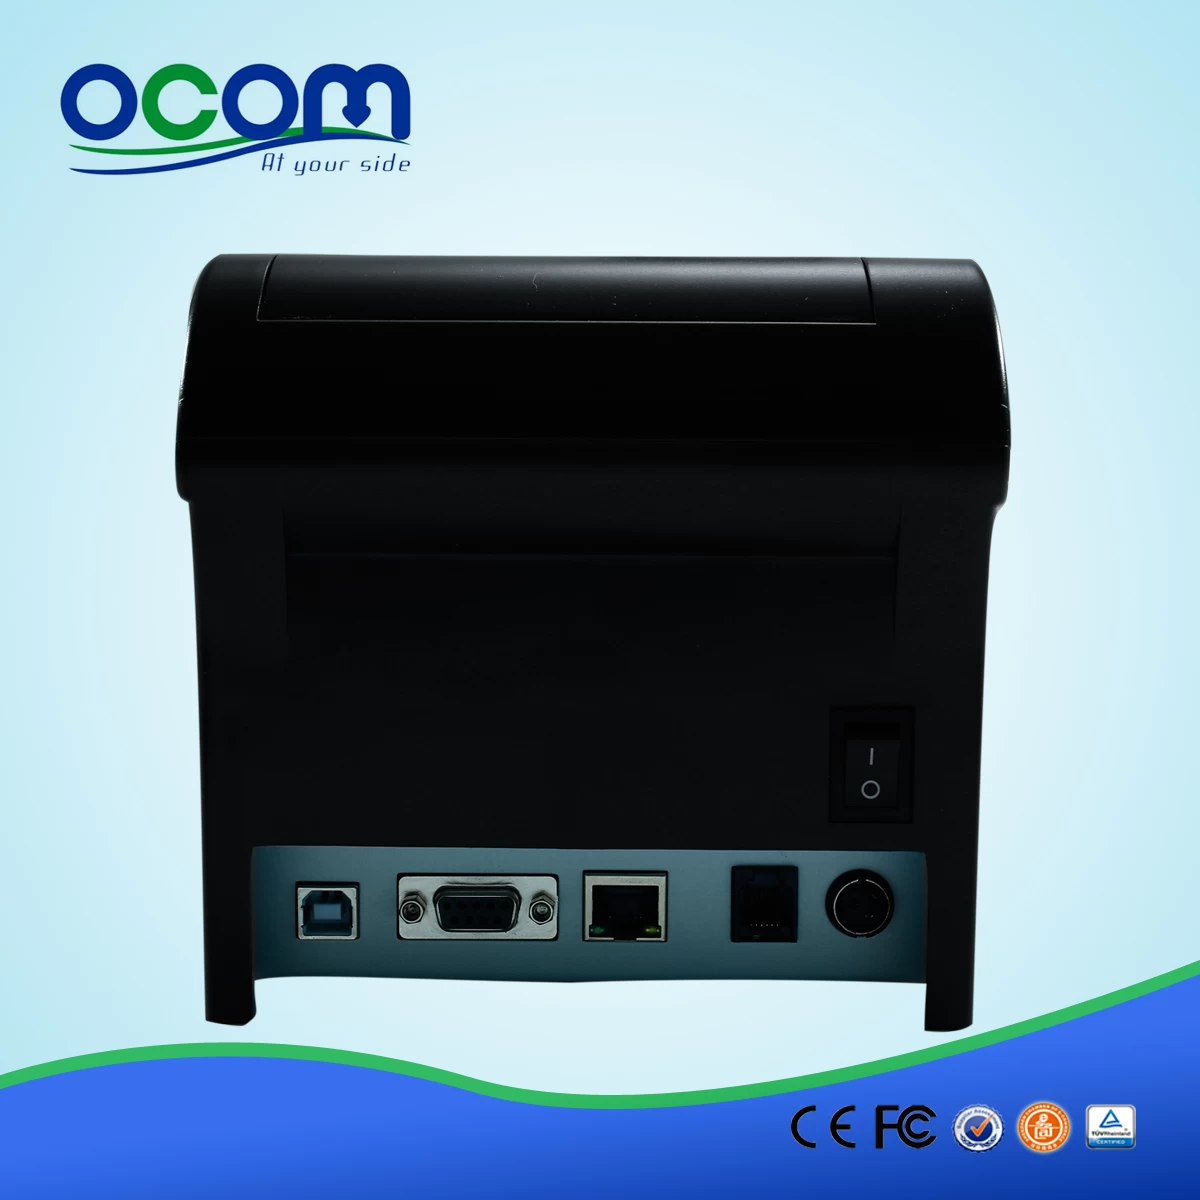 (OCPP-806) 3 inches With Auto-cutter Thermal Bill Printer